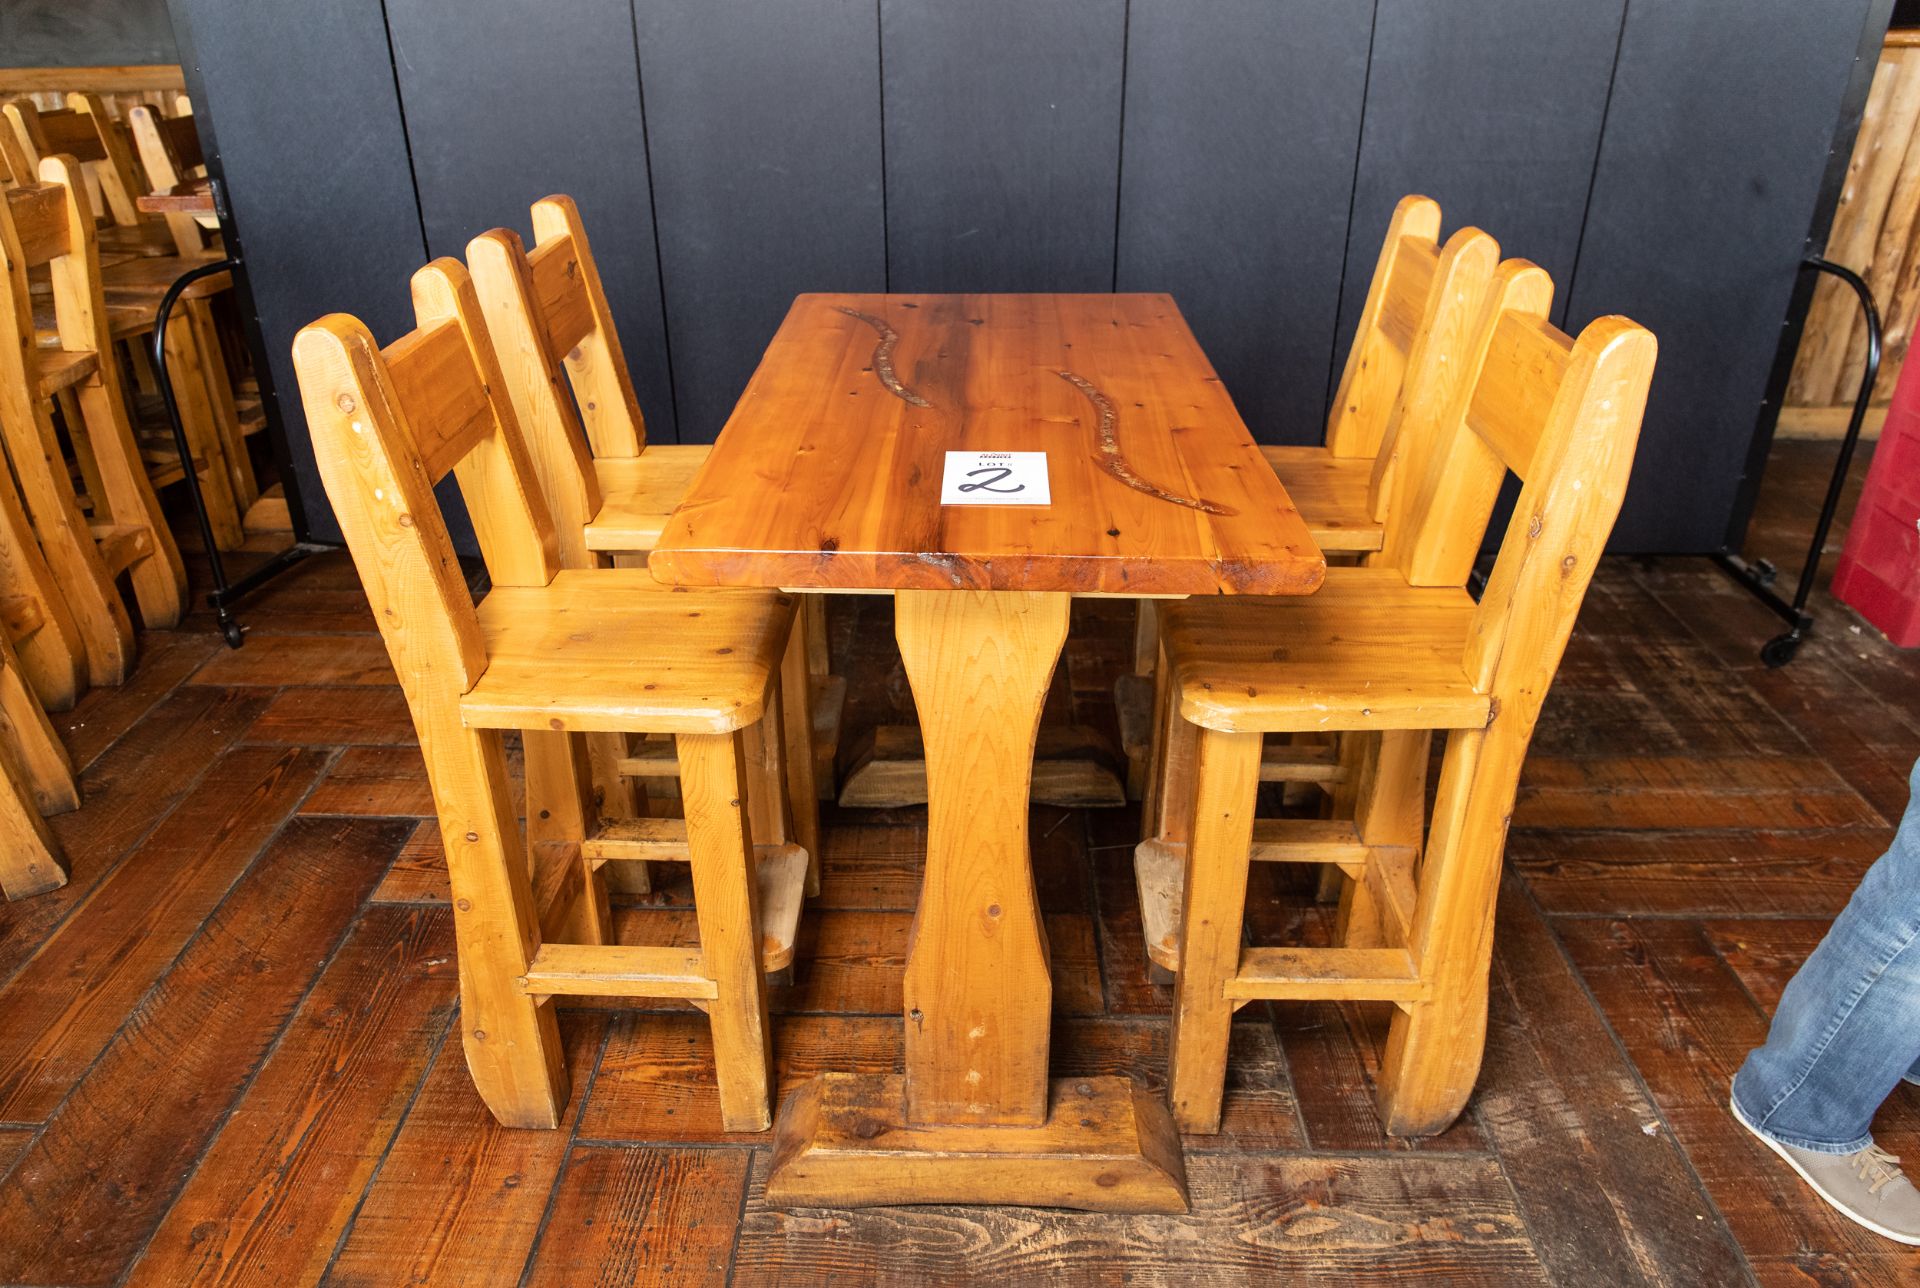 PUB TABLE WITH FOUR CHAIRS TABLE L 48" W 29 1/2" H 41"